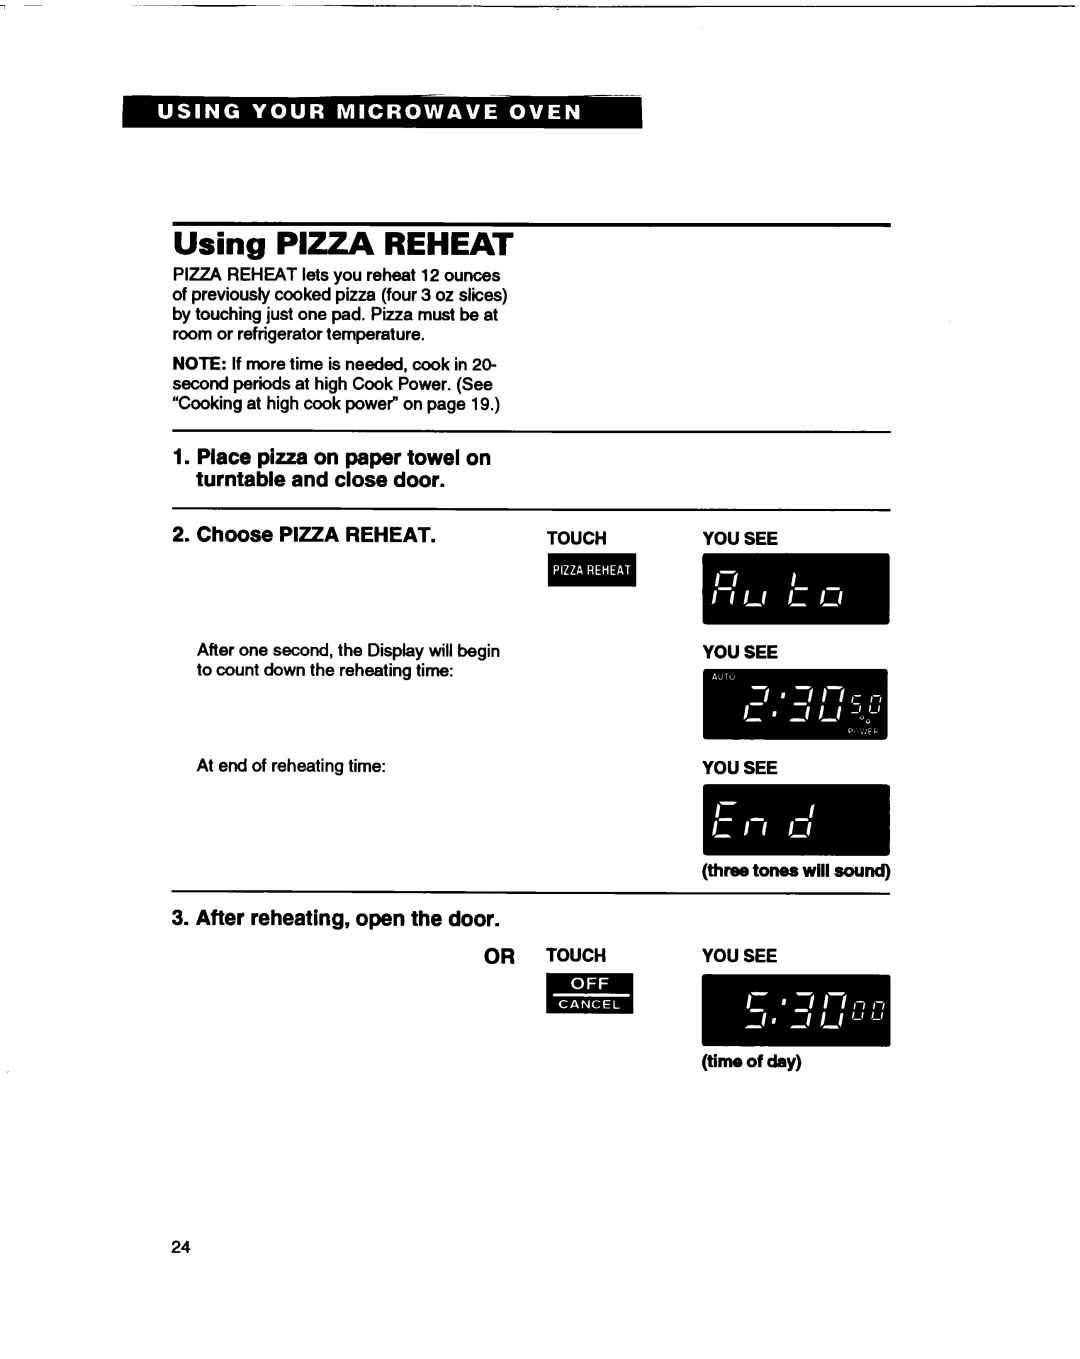 Whirlpool MT1061XB Using PIZZA REHEAT, Choose PIZZA REHEAT, After reheating, open the door, Or Touch, time of day 